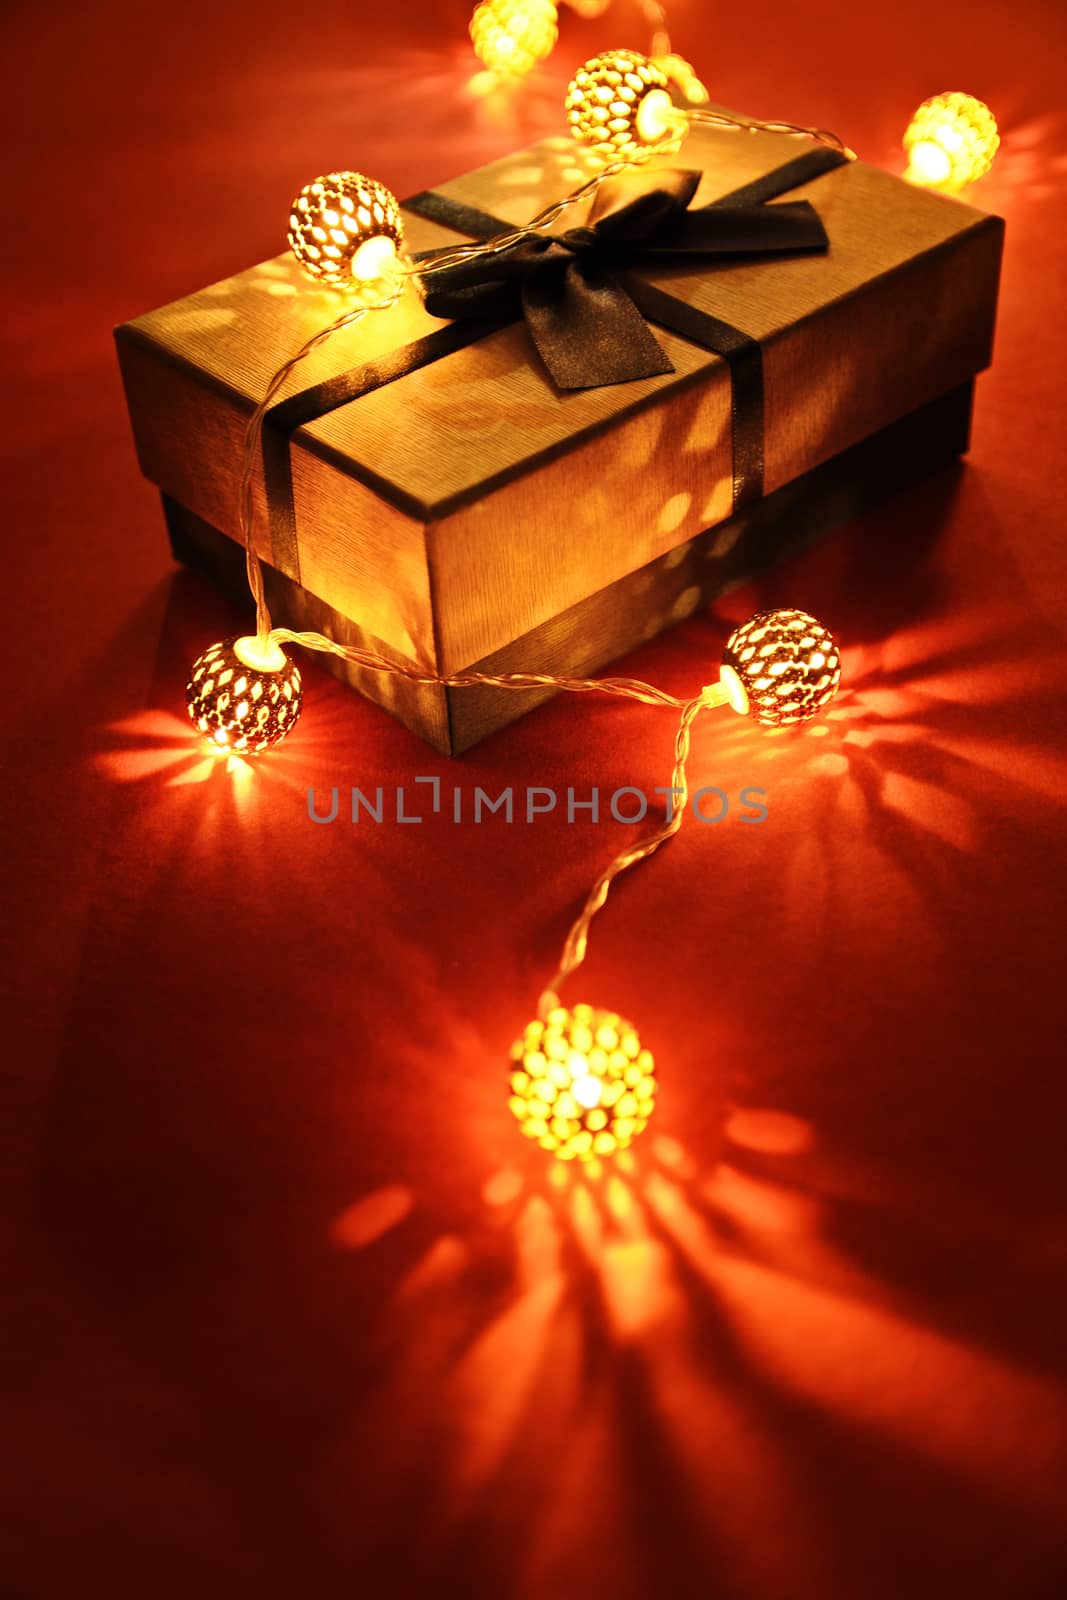 Wrapped gift under glowing Christmas lights by Mendelex